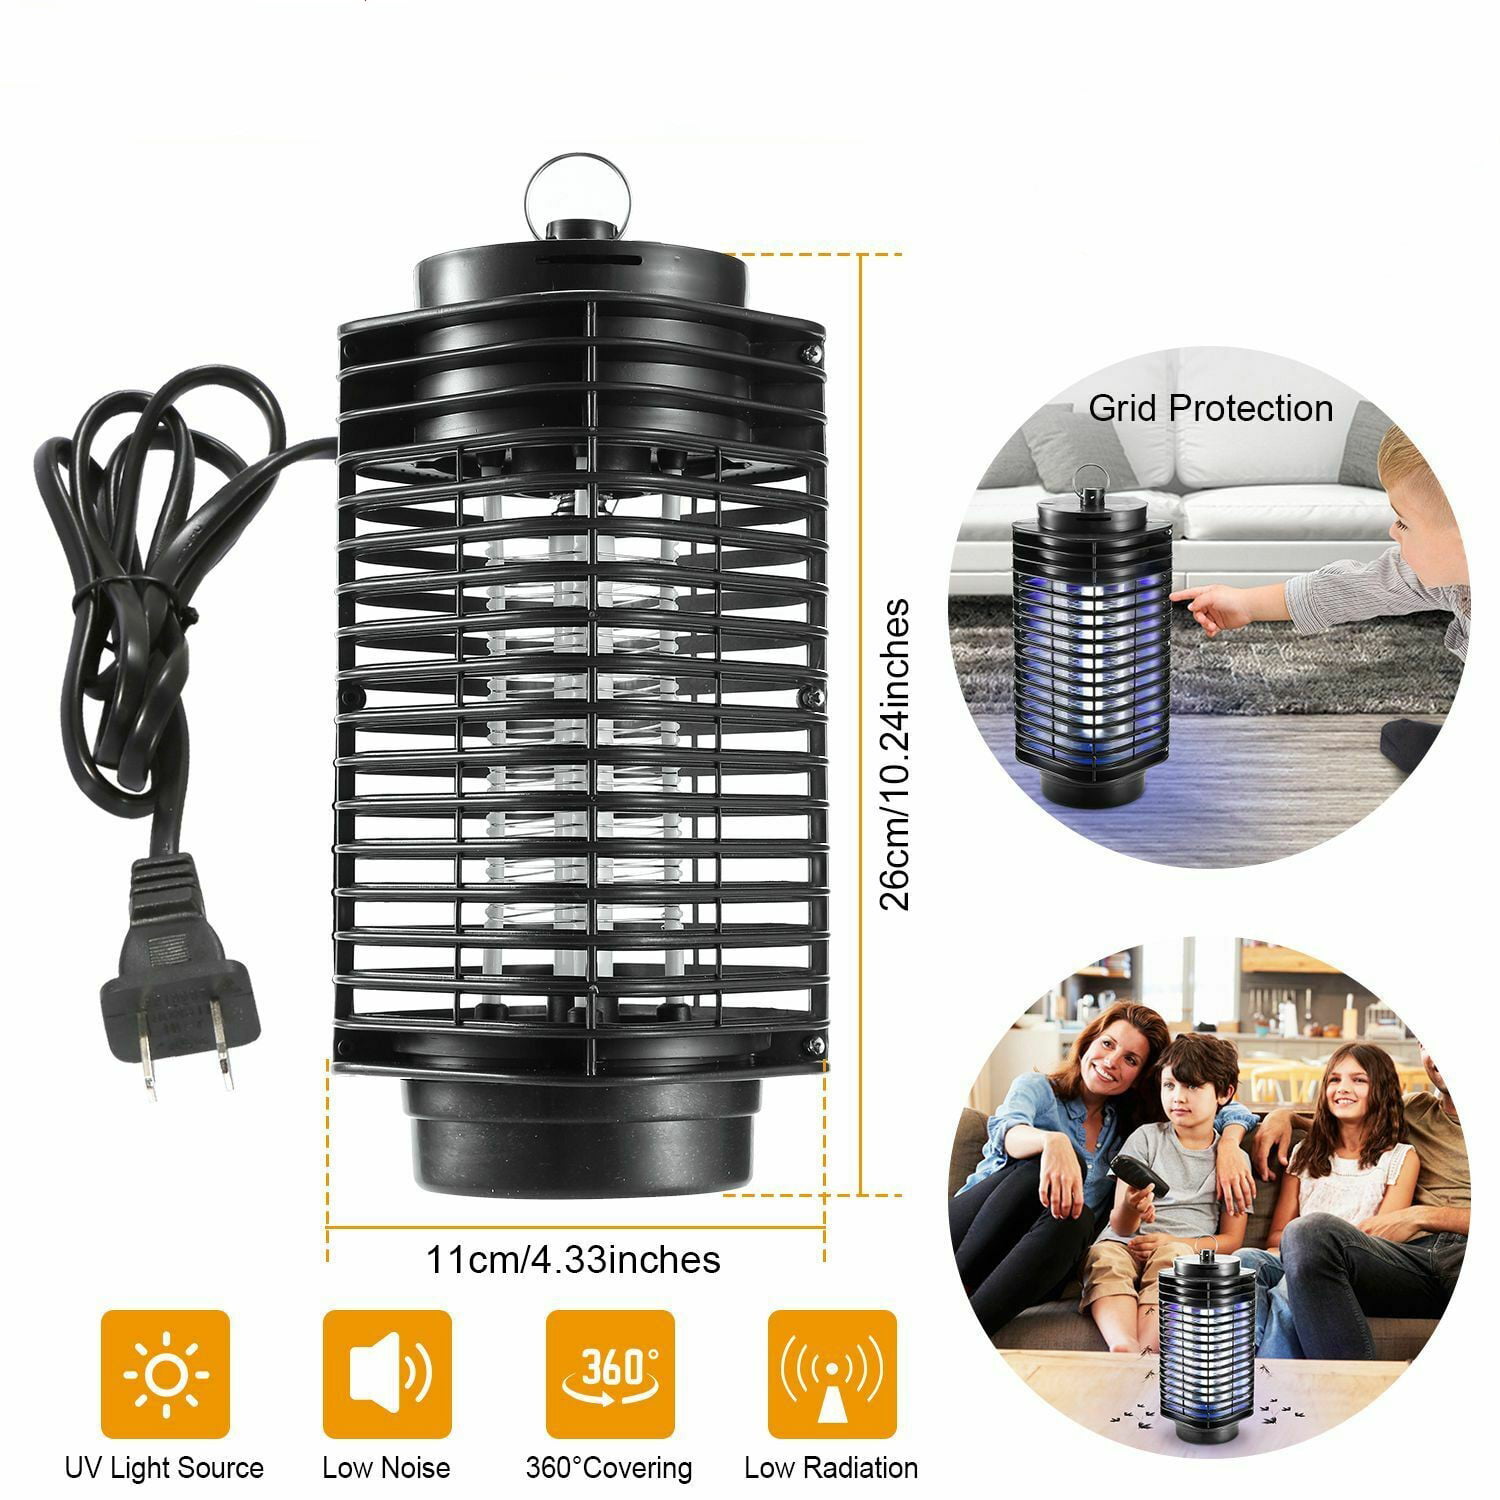 PENSONIC PMK-L5000 Home Mosquito Trap Air purification Indoor insect Killer 220V 